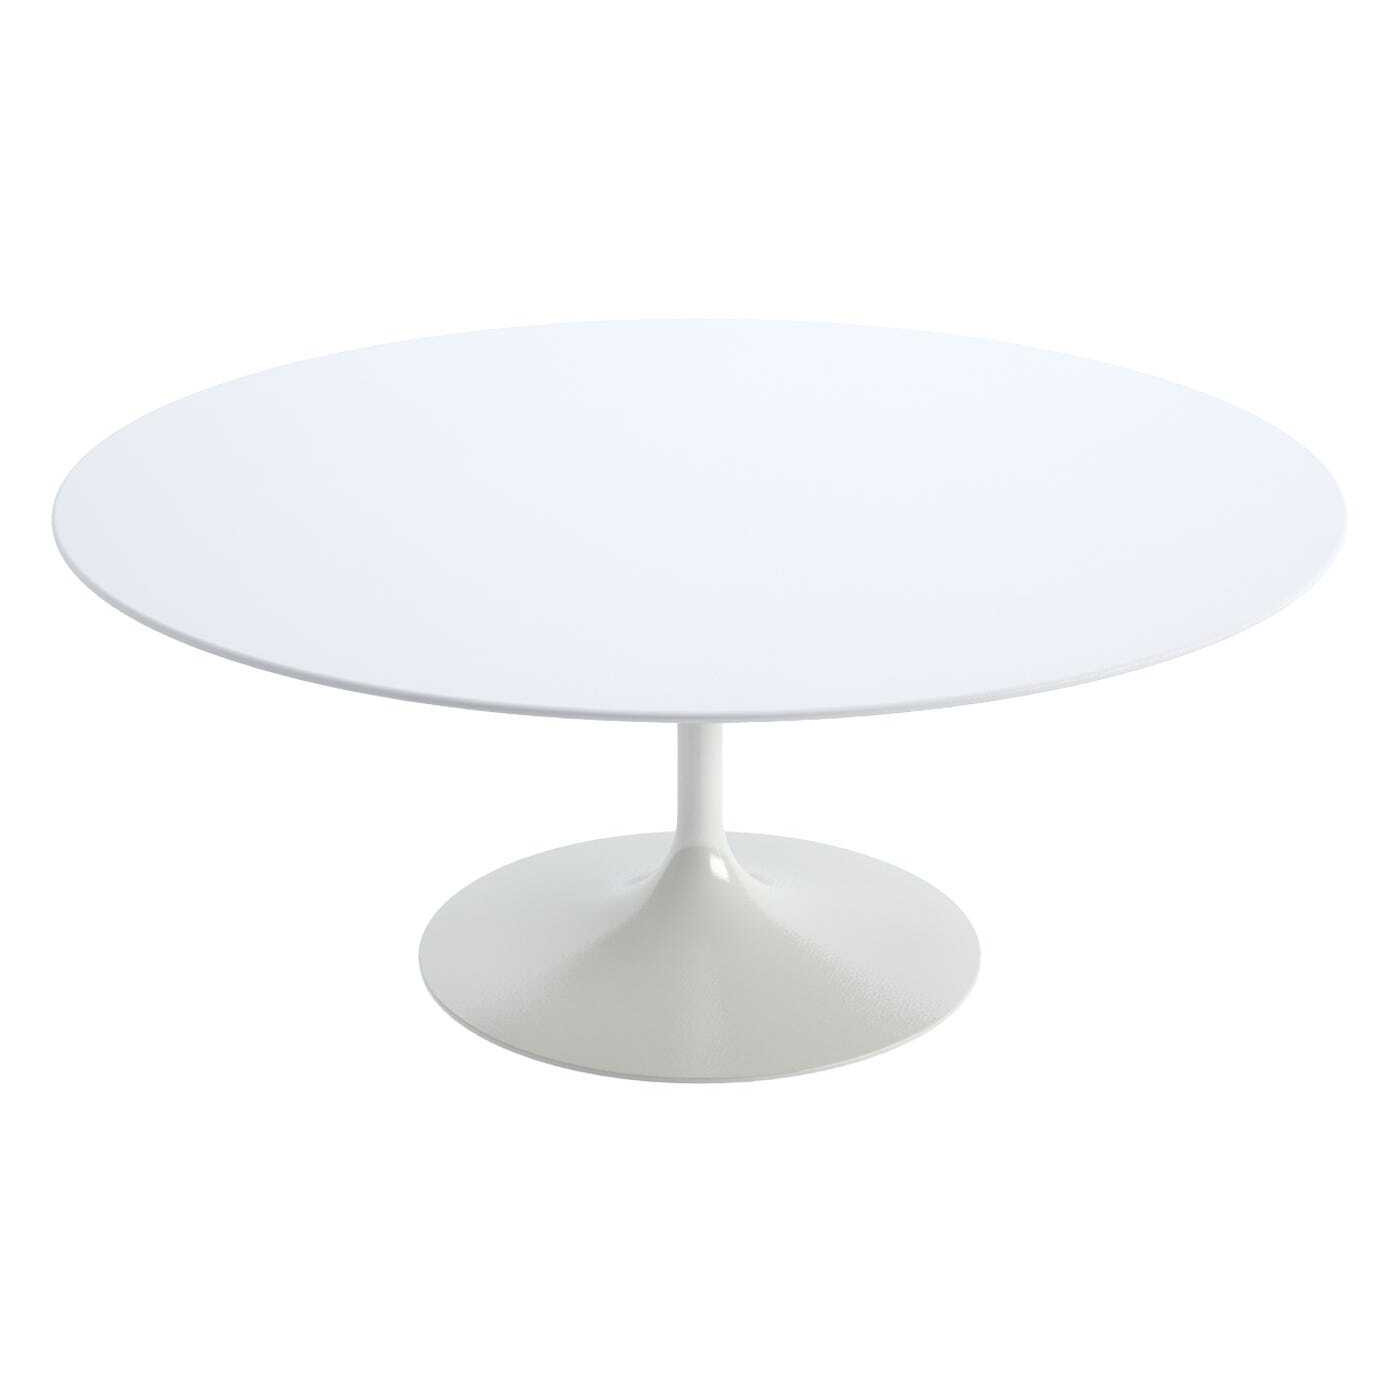 Knoll Saarinen Coffee Table with White Base in Calacatta 91cm - image 1